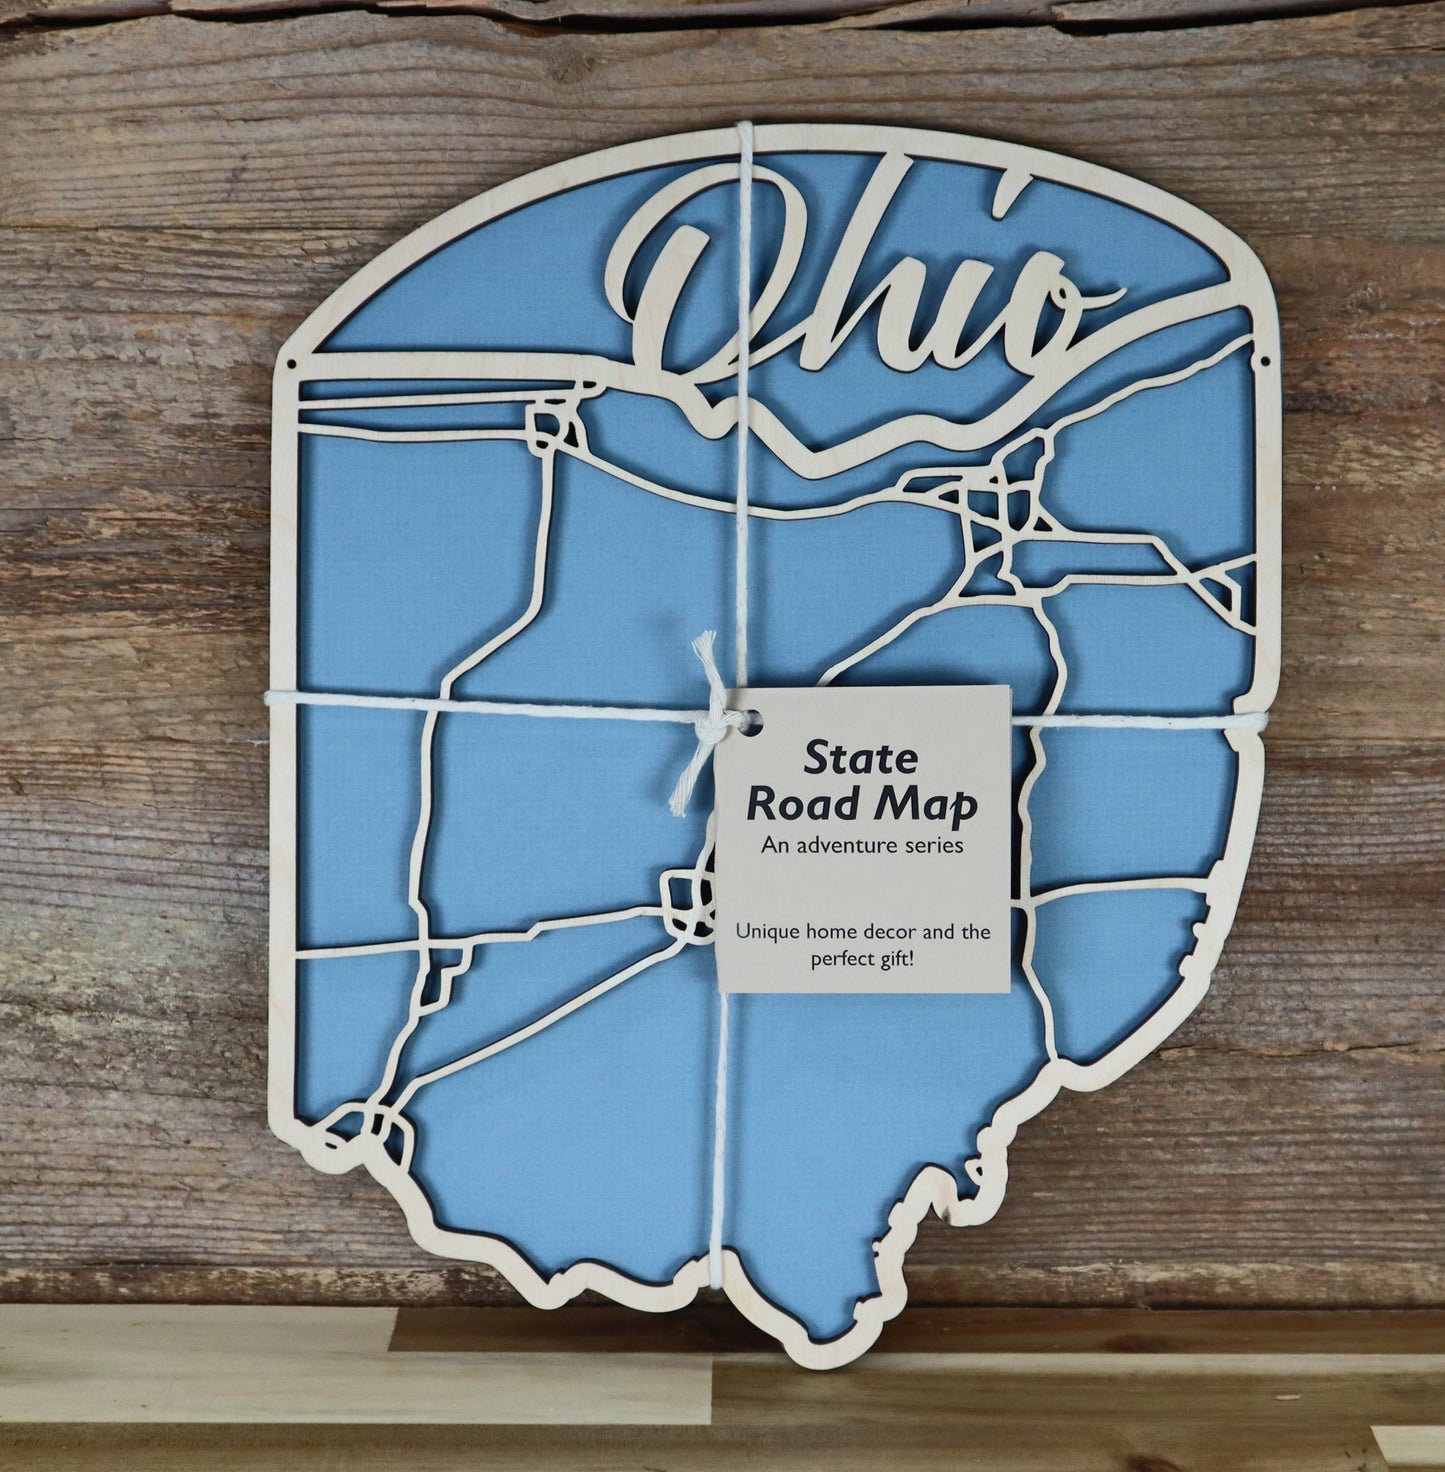 Ohio State Road Map